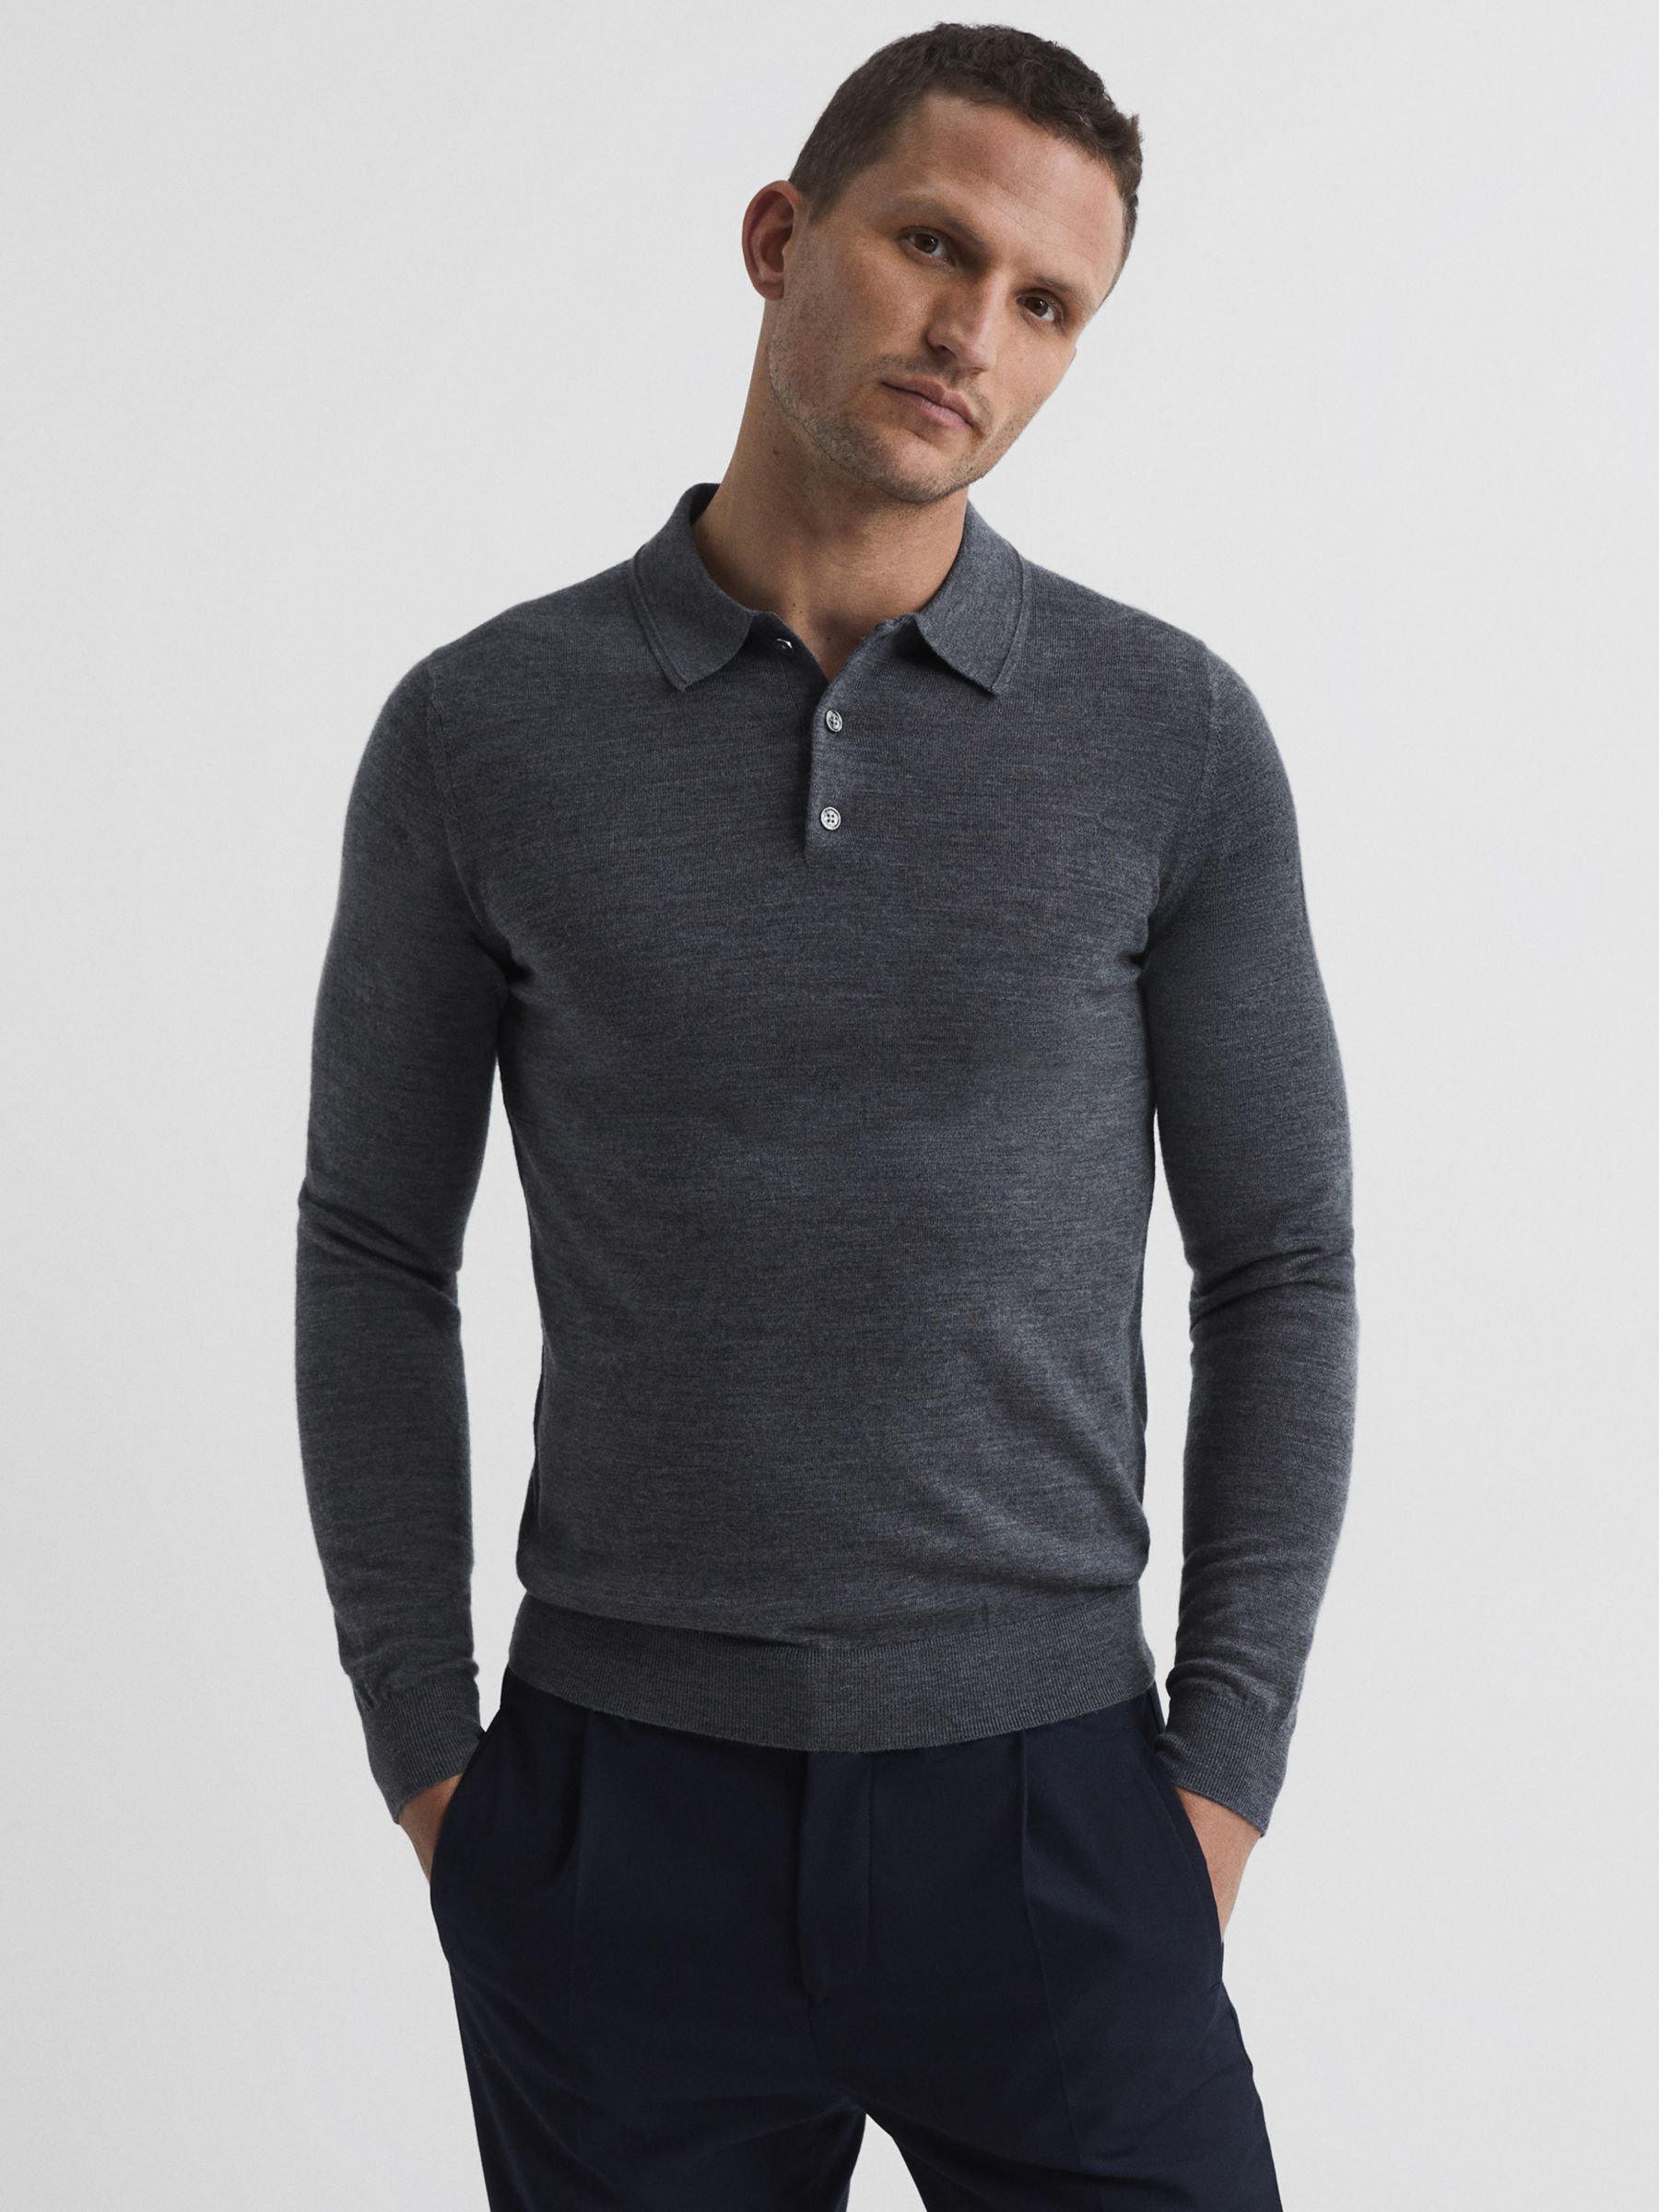 Reiss Trafford Knitted Wool Long Sleeve Polo Top, Mid Grey Melange at John  Lewis & Partners